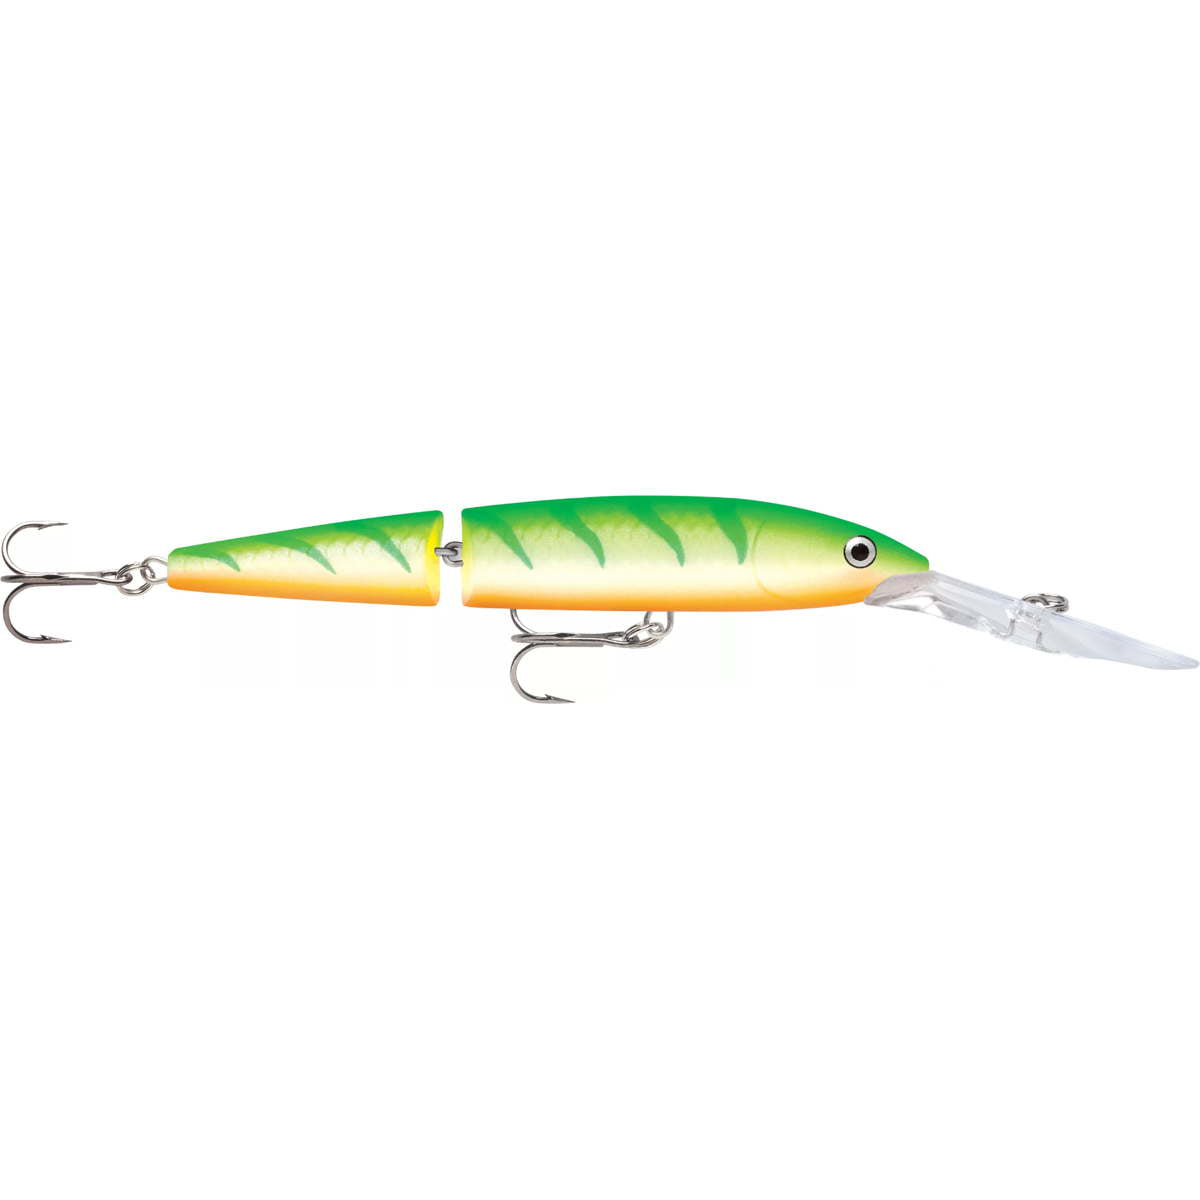 Photo of Rapala Jointed Deep Husky Jerk for sale at United Tackle Shops.